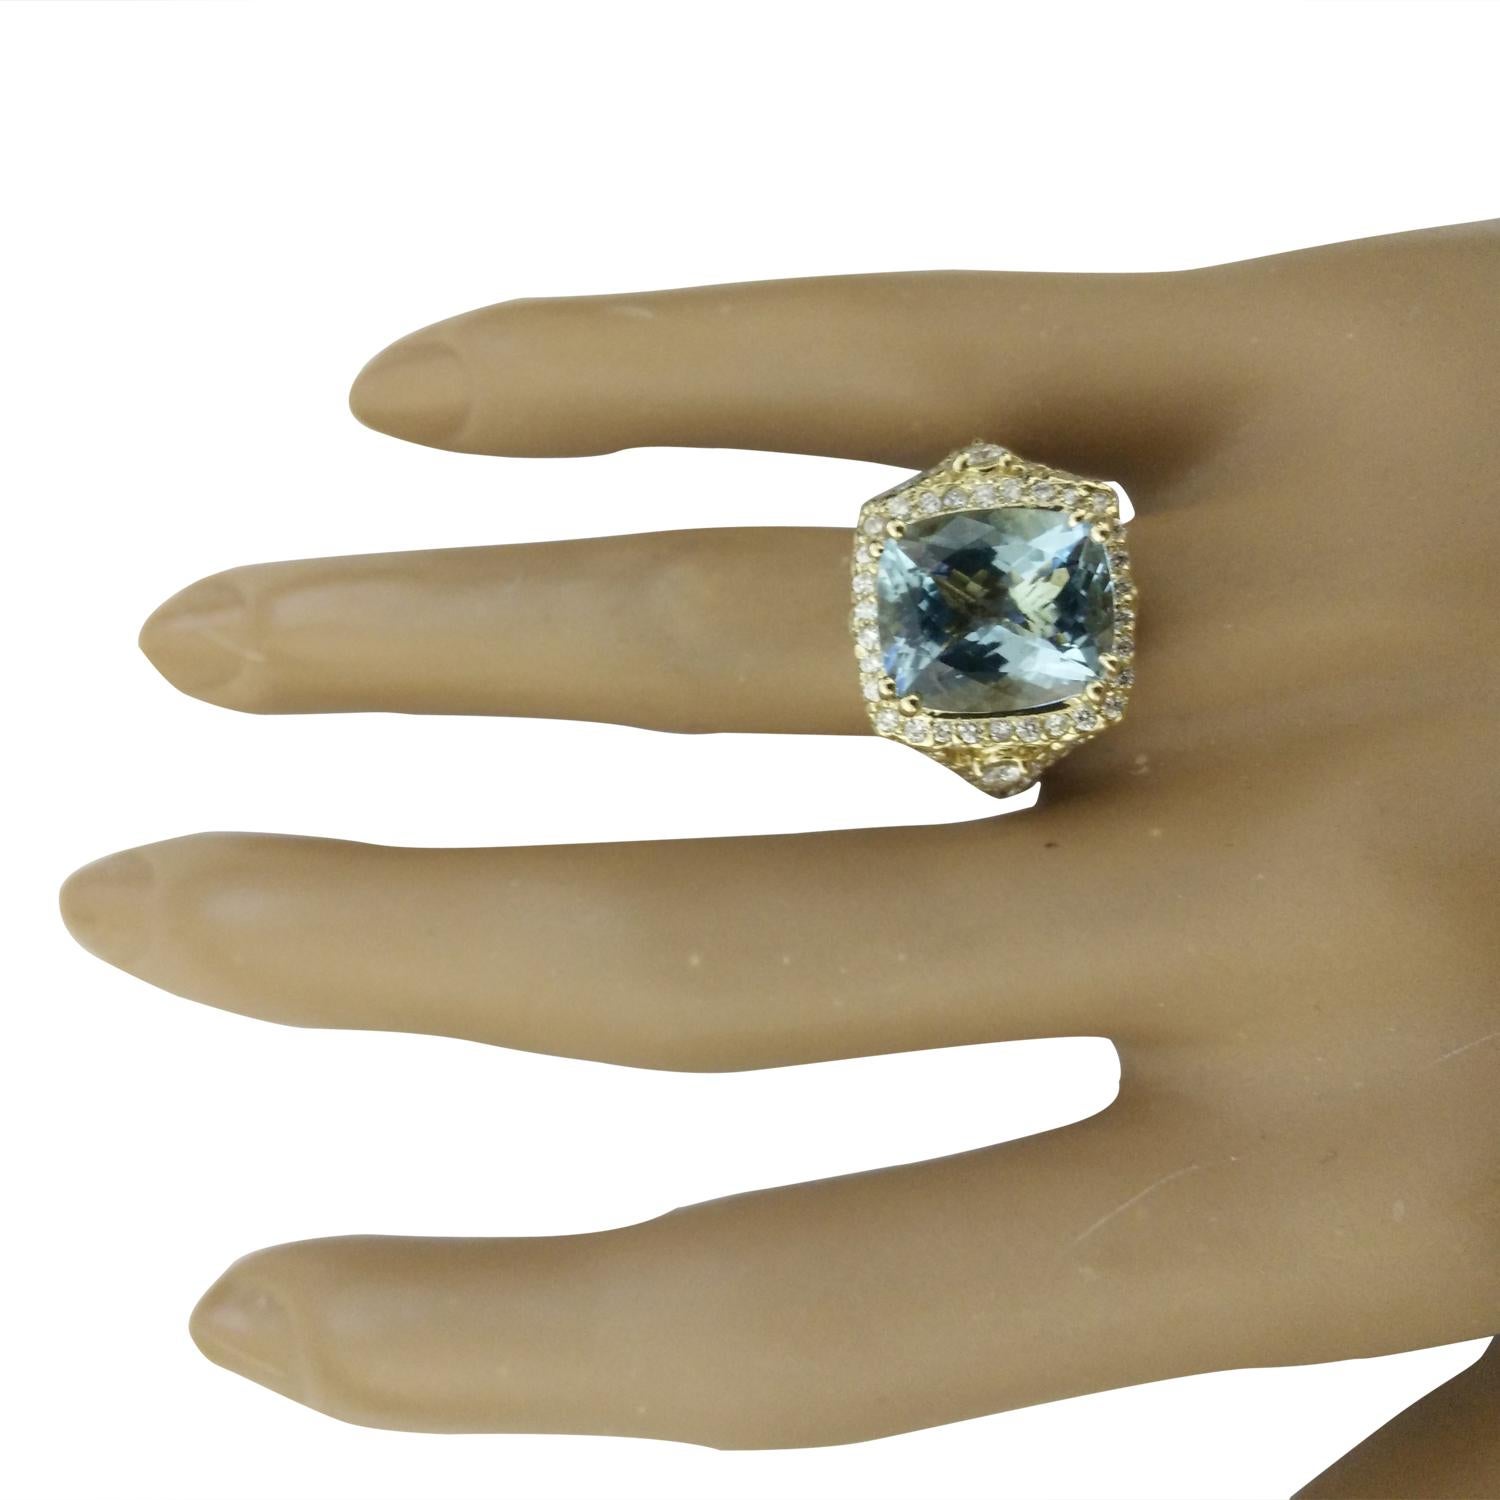 6.17 Carat Natural Aquamarine 14 Karat Solid Yellow Gold Diamond Ring
Stamped: 14K 
Total Ring Weight: 8.8 Grams 
Aquamarine Weight: 5.17 Carat (12.00x10.00 Millimeters)  
Diamond Weight: 1.00 Carat (F-G Color, VS2-SI1 Clarity )
Face Measures: